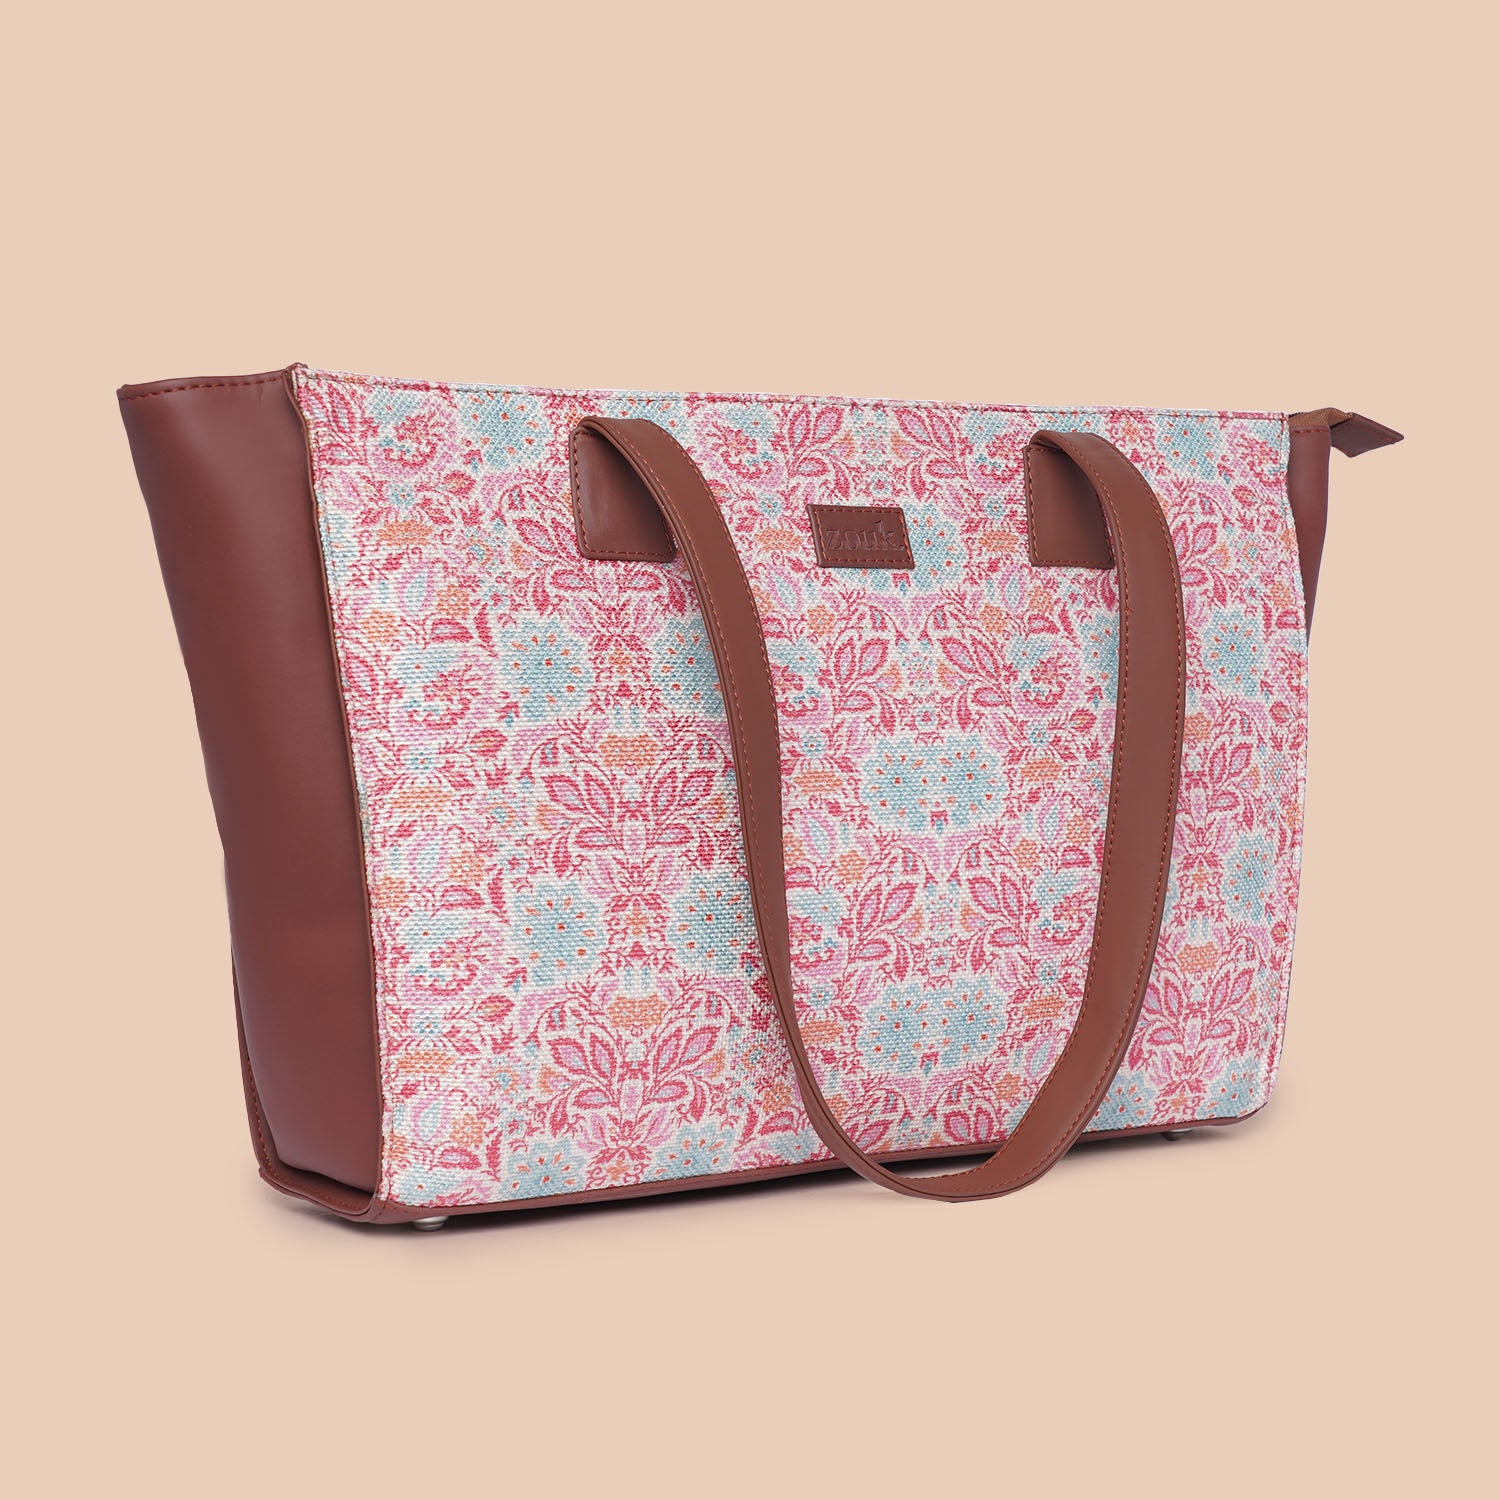 Mangalore Blossoms Office Tote Bag